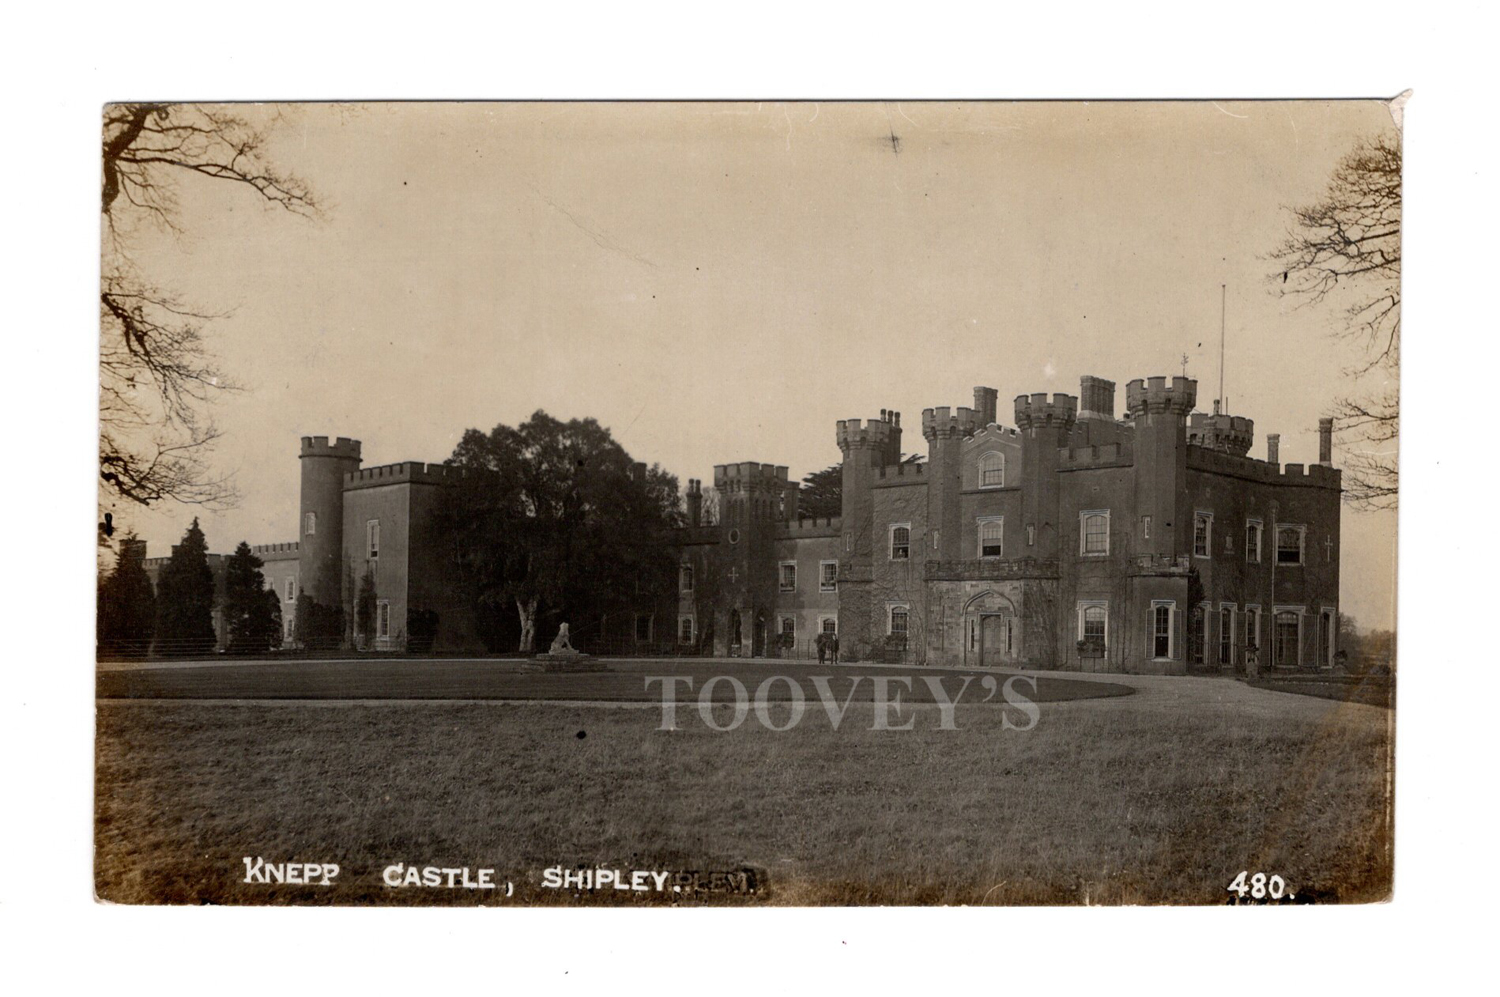 A collection of 19 photographic postcards of West Sussex, including postcards titled 'Shipley Post - Image 7 of 19